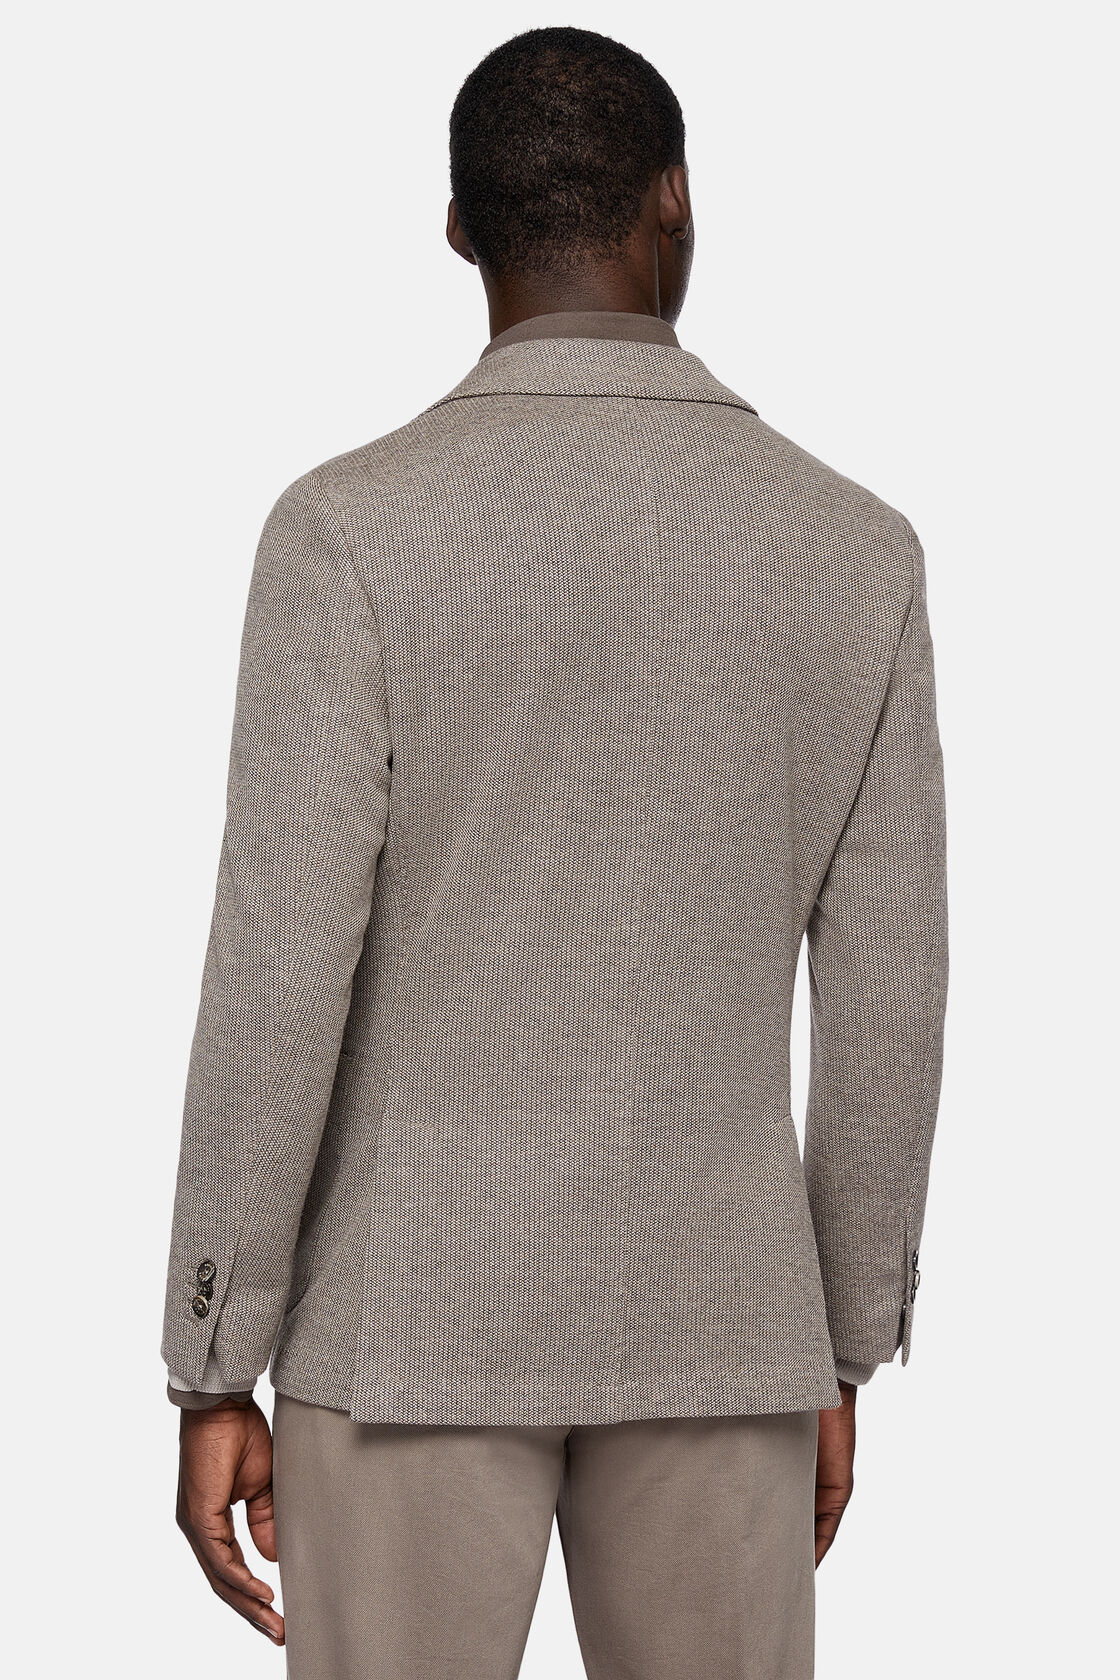 B Jersey Dove Grey Jacket In Cotton Blend, Taupe, hi-res